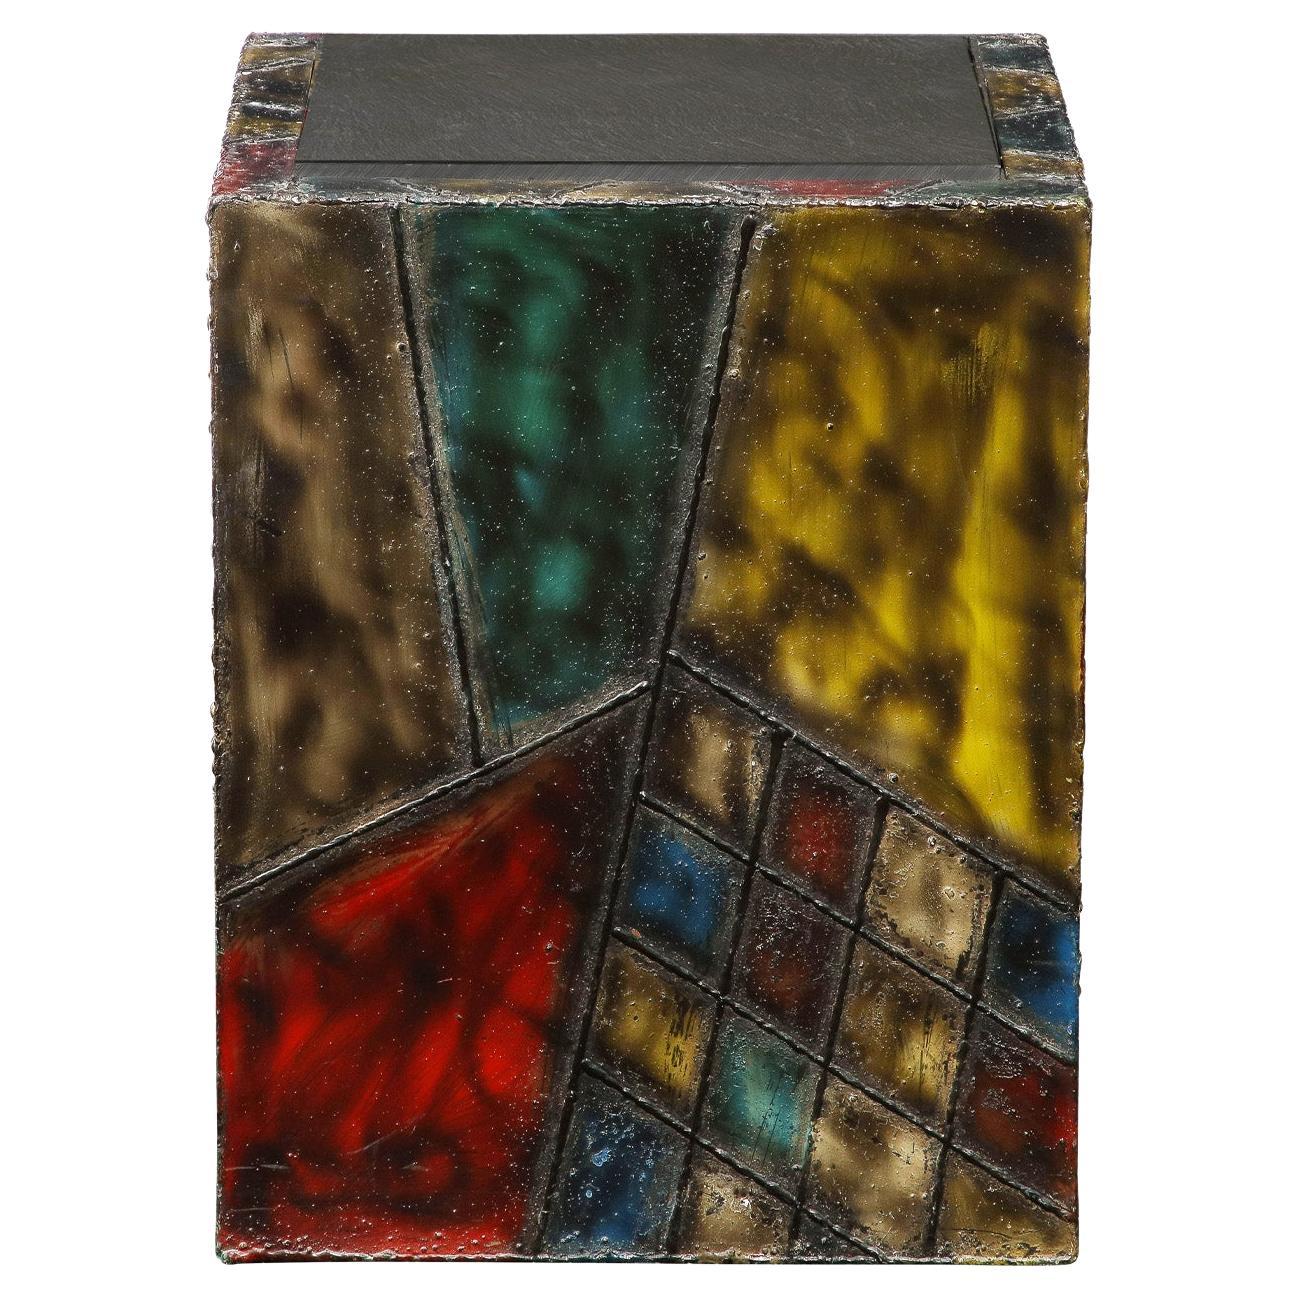 Paul Evans Hand-Welded Cube Table with Polychrome Enamels 1973 'Signed'